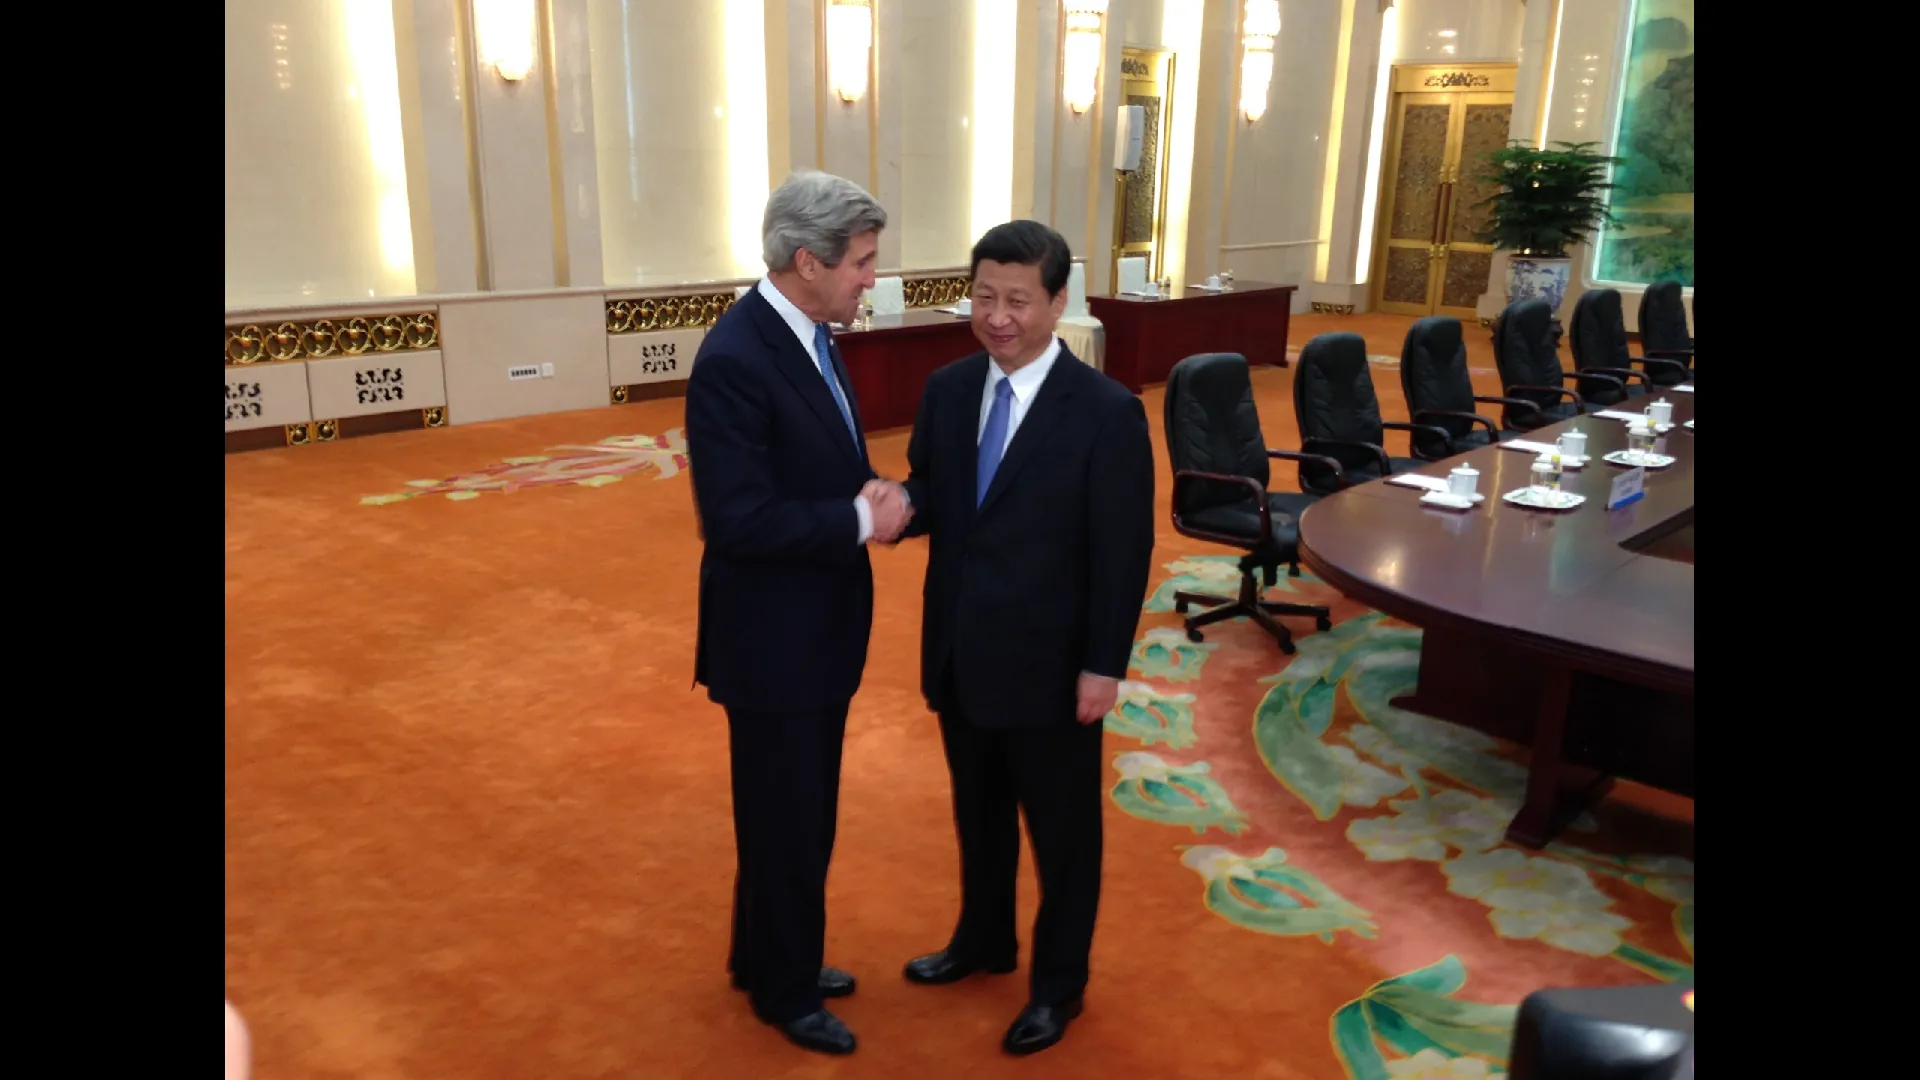 John Kerry Takes Lead in Climate Change Discussions with China